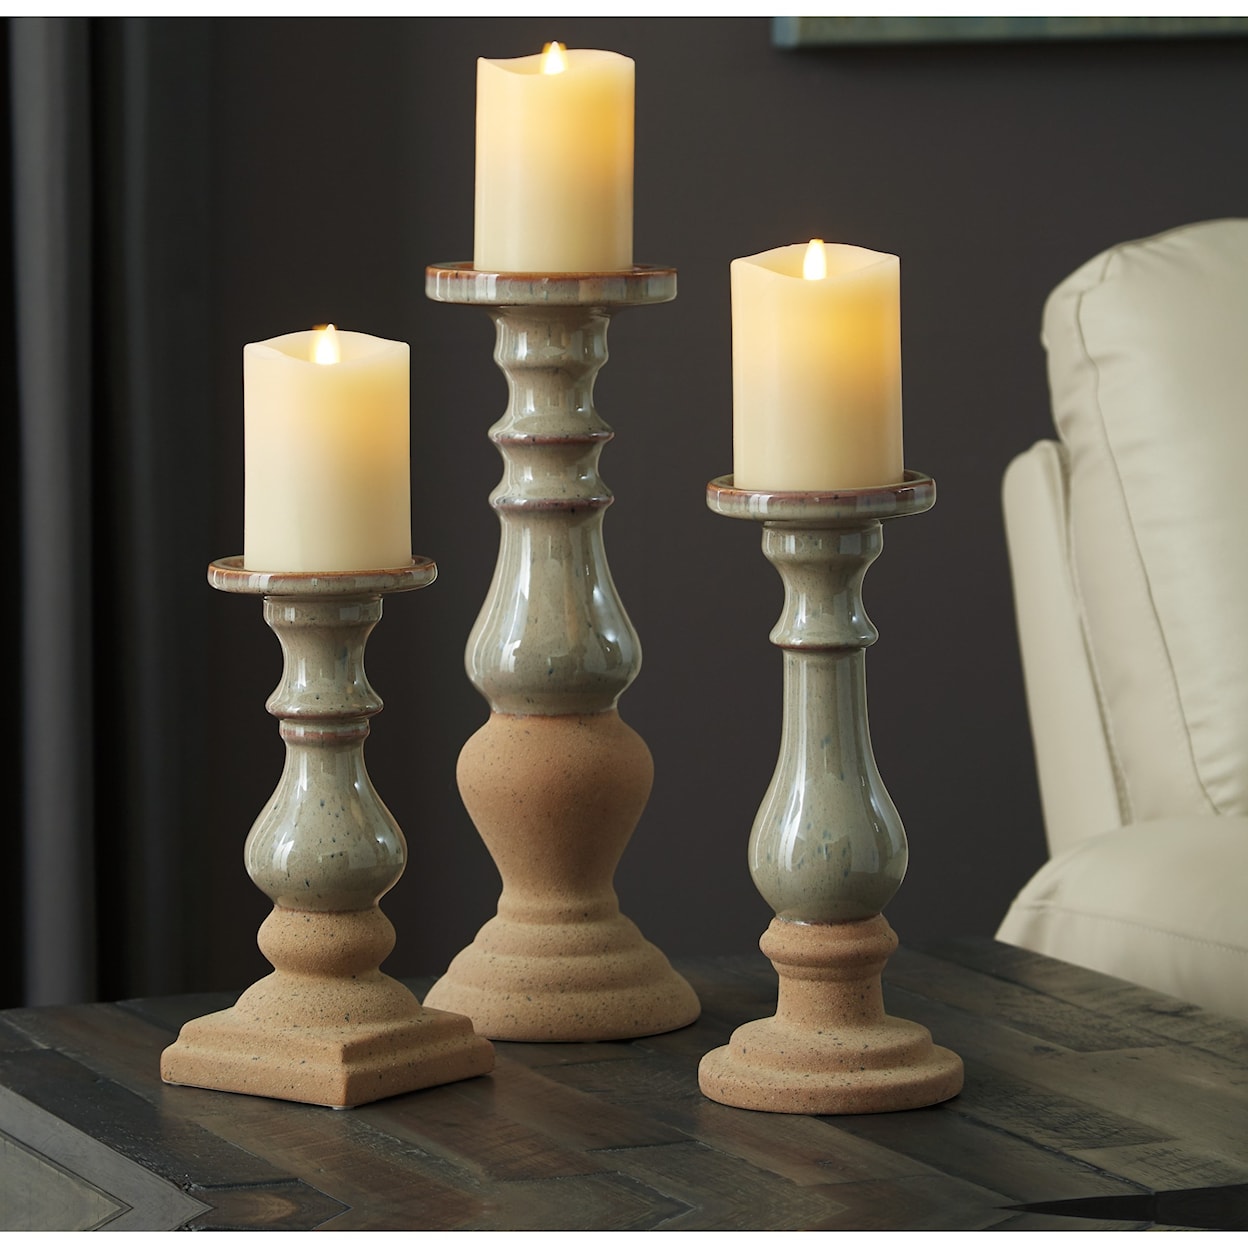 Signature Design by Ashley Accents Emele Taupe Candle Holder Set